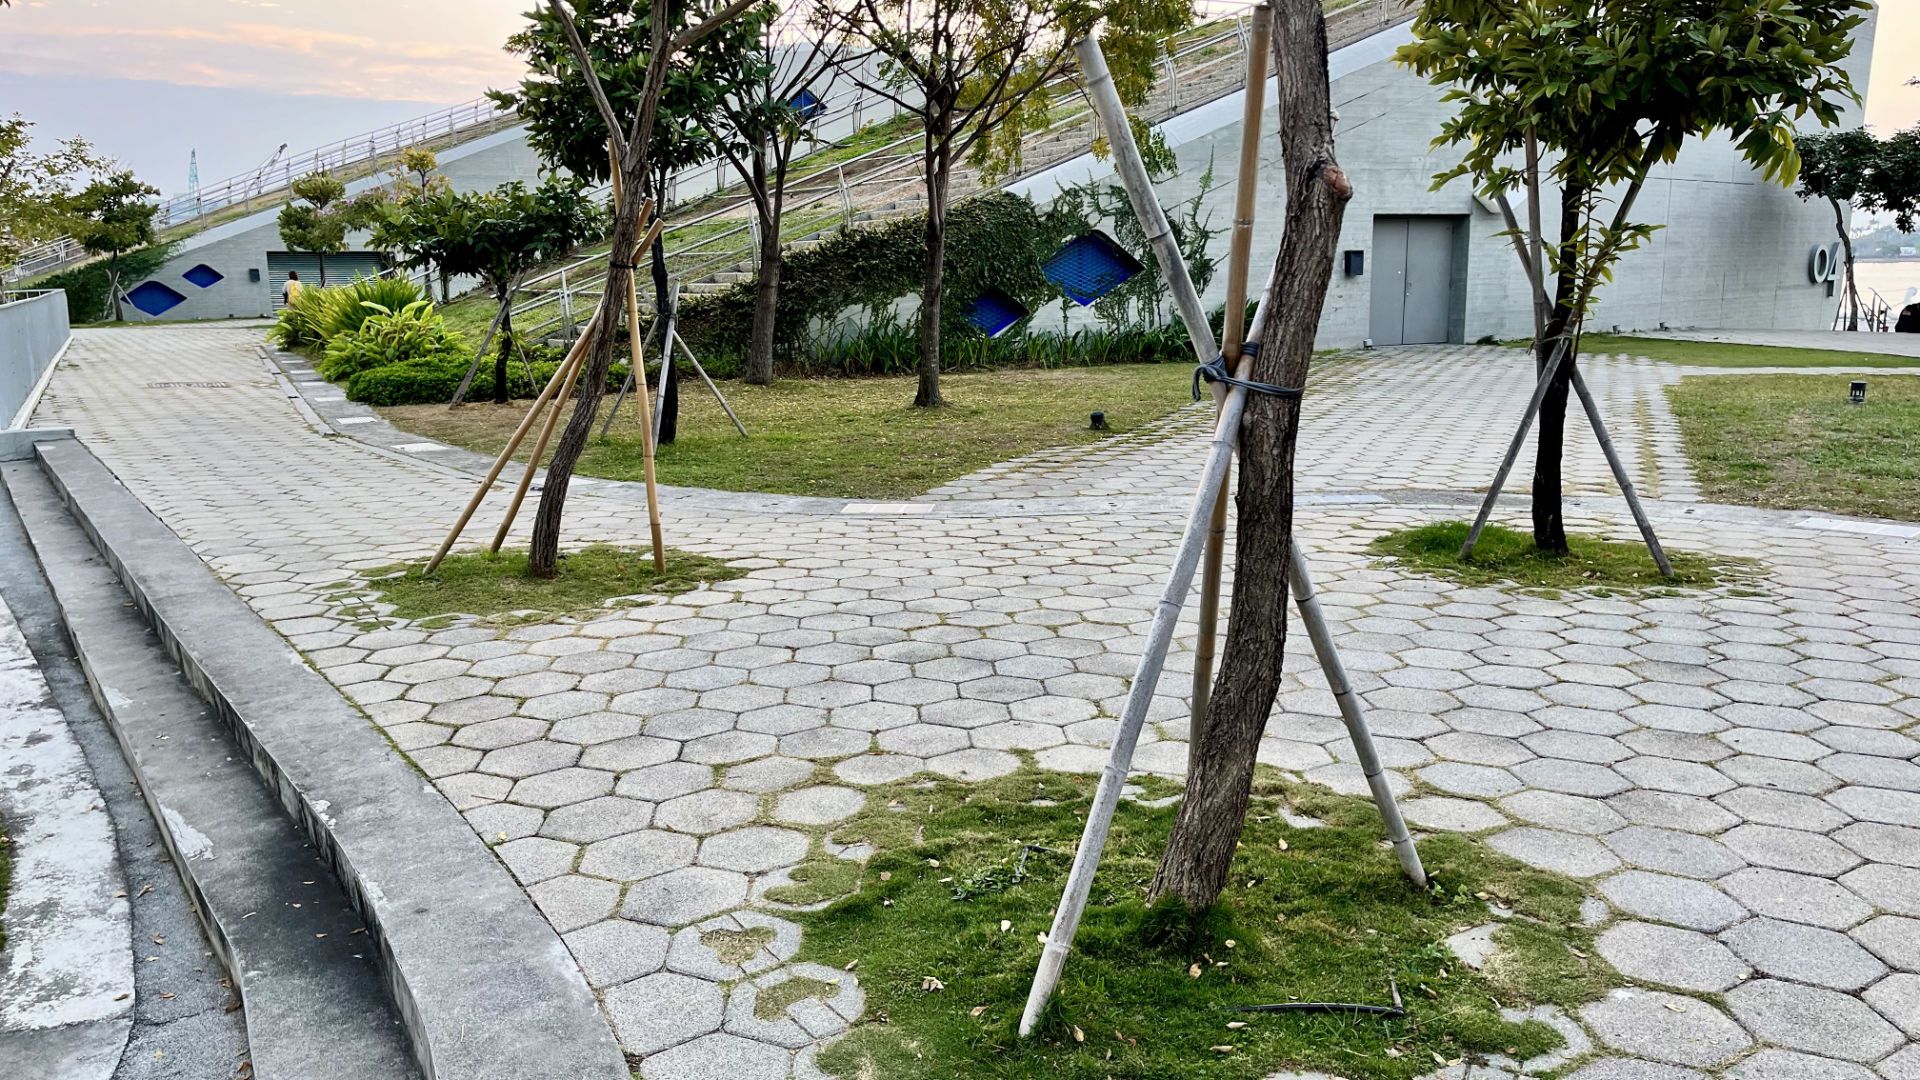 Trees supported by bamboo poles, with wedge-shaped concrete buildings in the background.